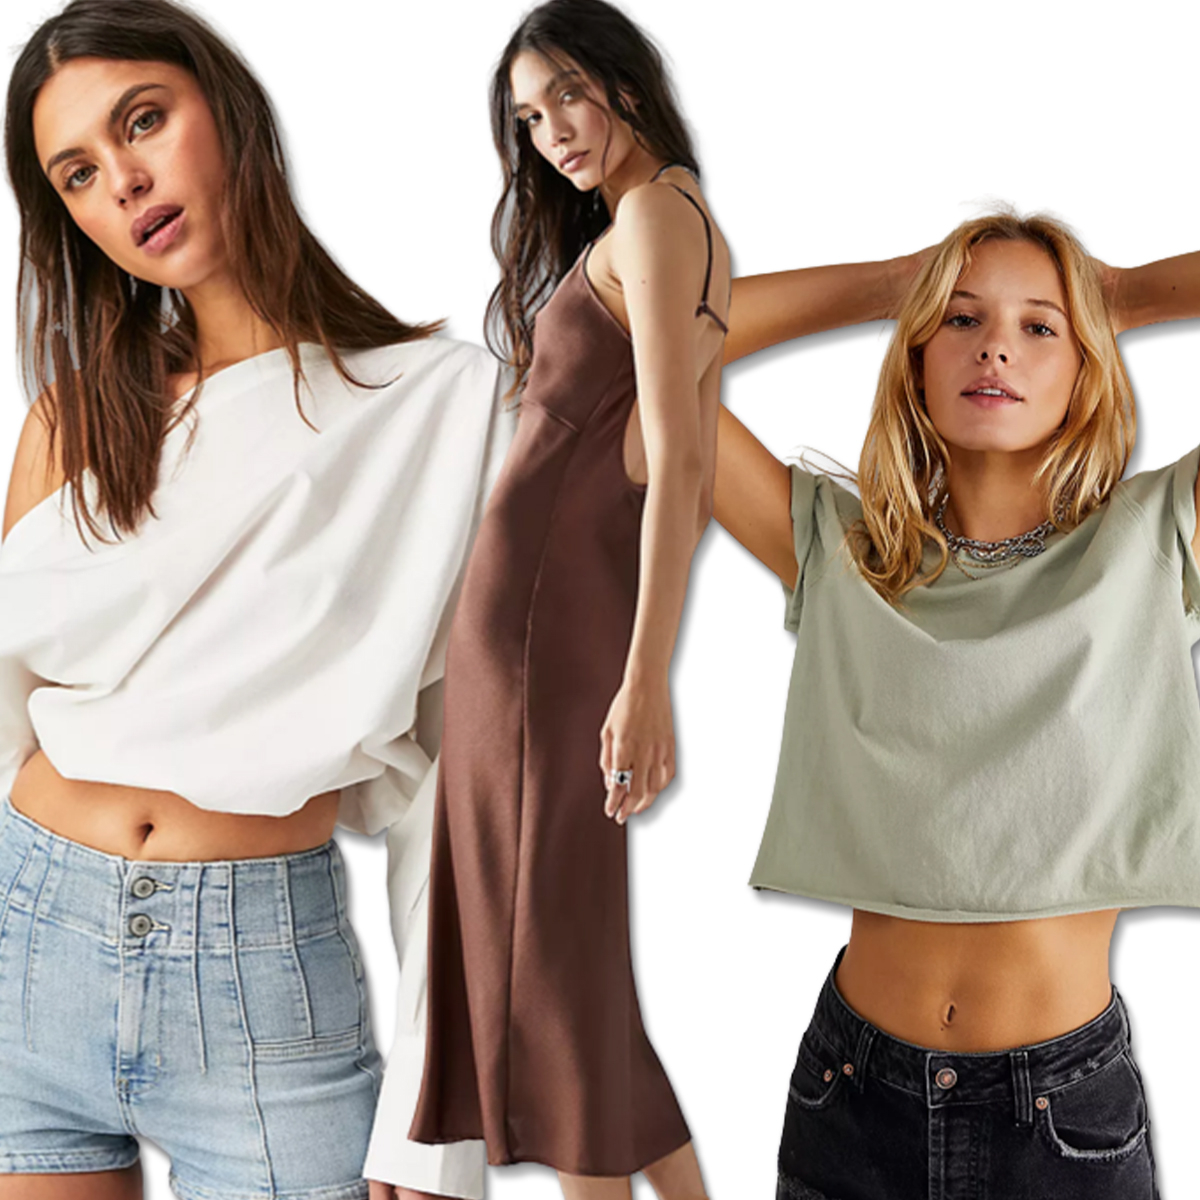 15 Must-Have Free People Pieces Our Shopping Editors Would Buy With $100 – E! Online